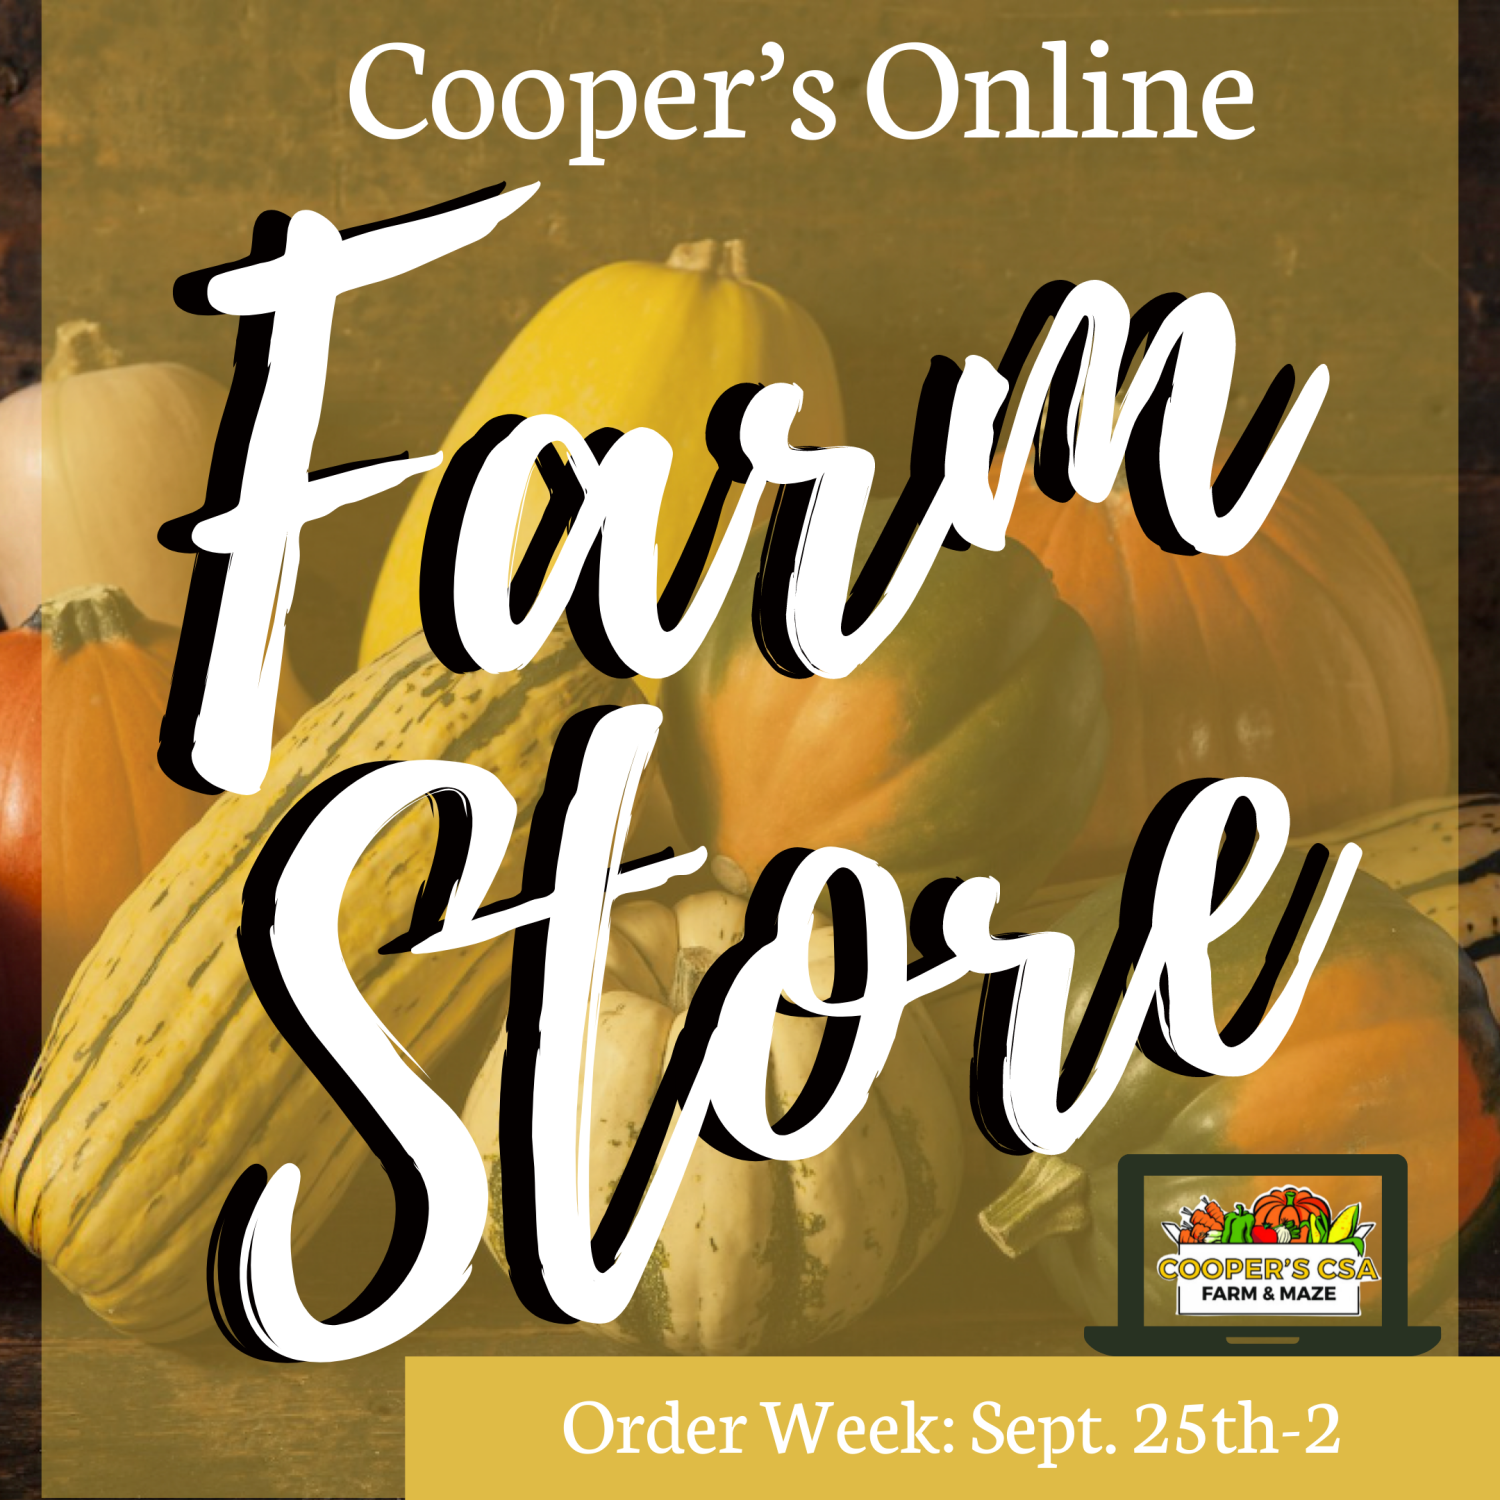 Previous Happening: Coopers CSA Online FarmStore- Order week Sept. 25-28th